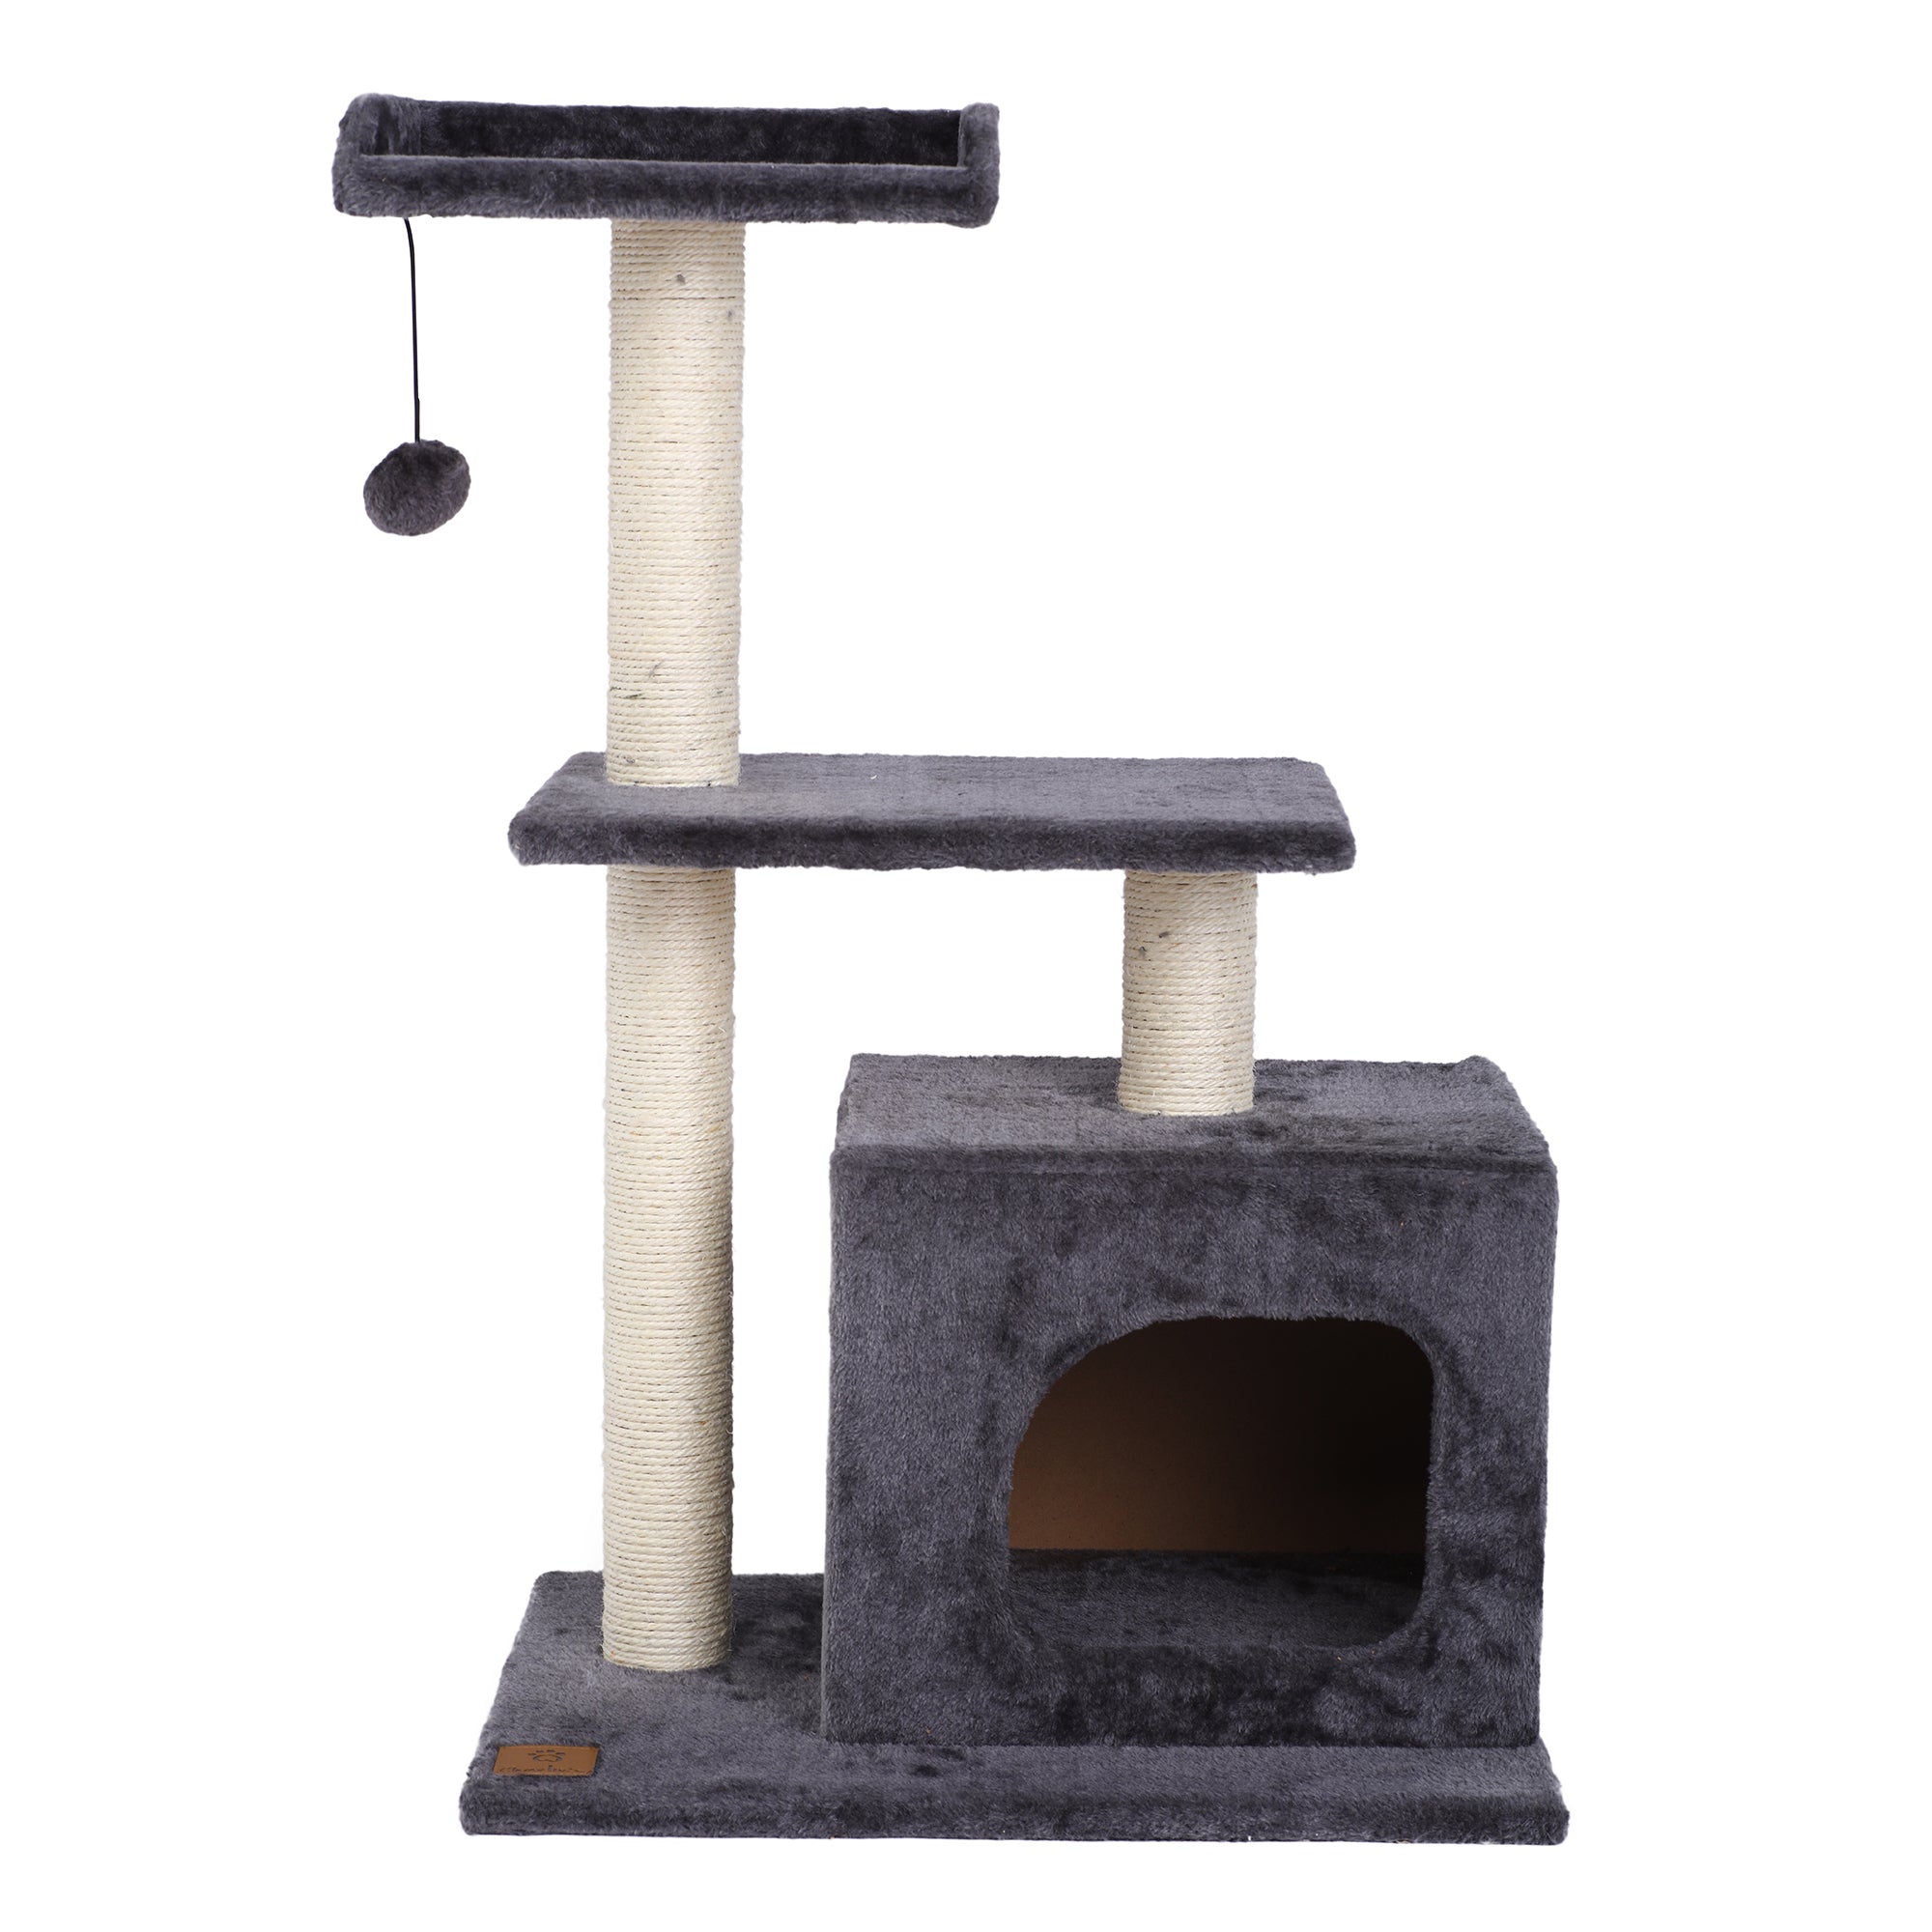 Charlie's Square House Cat Tree - Charcoal